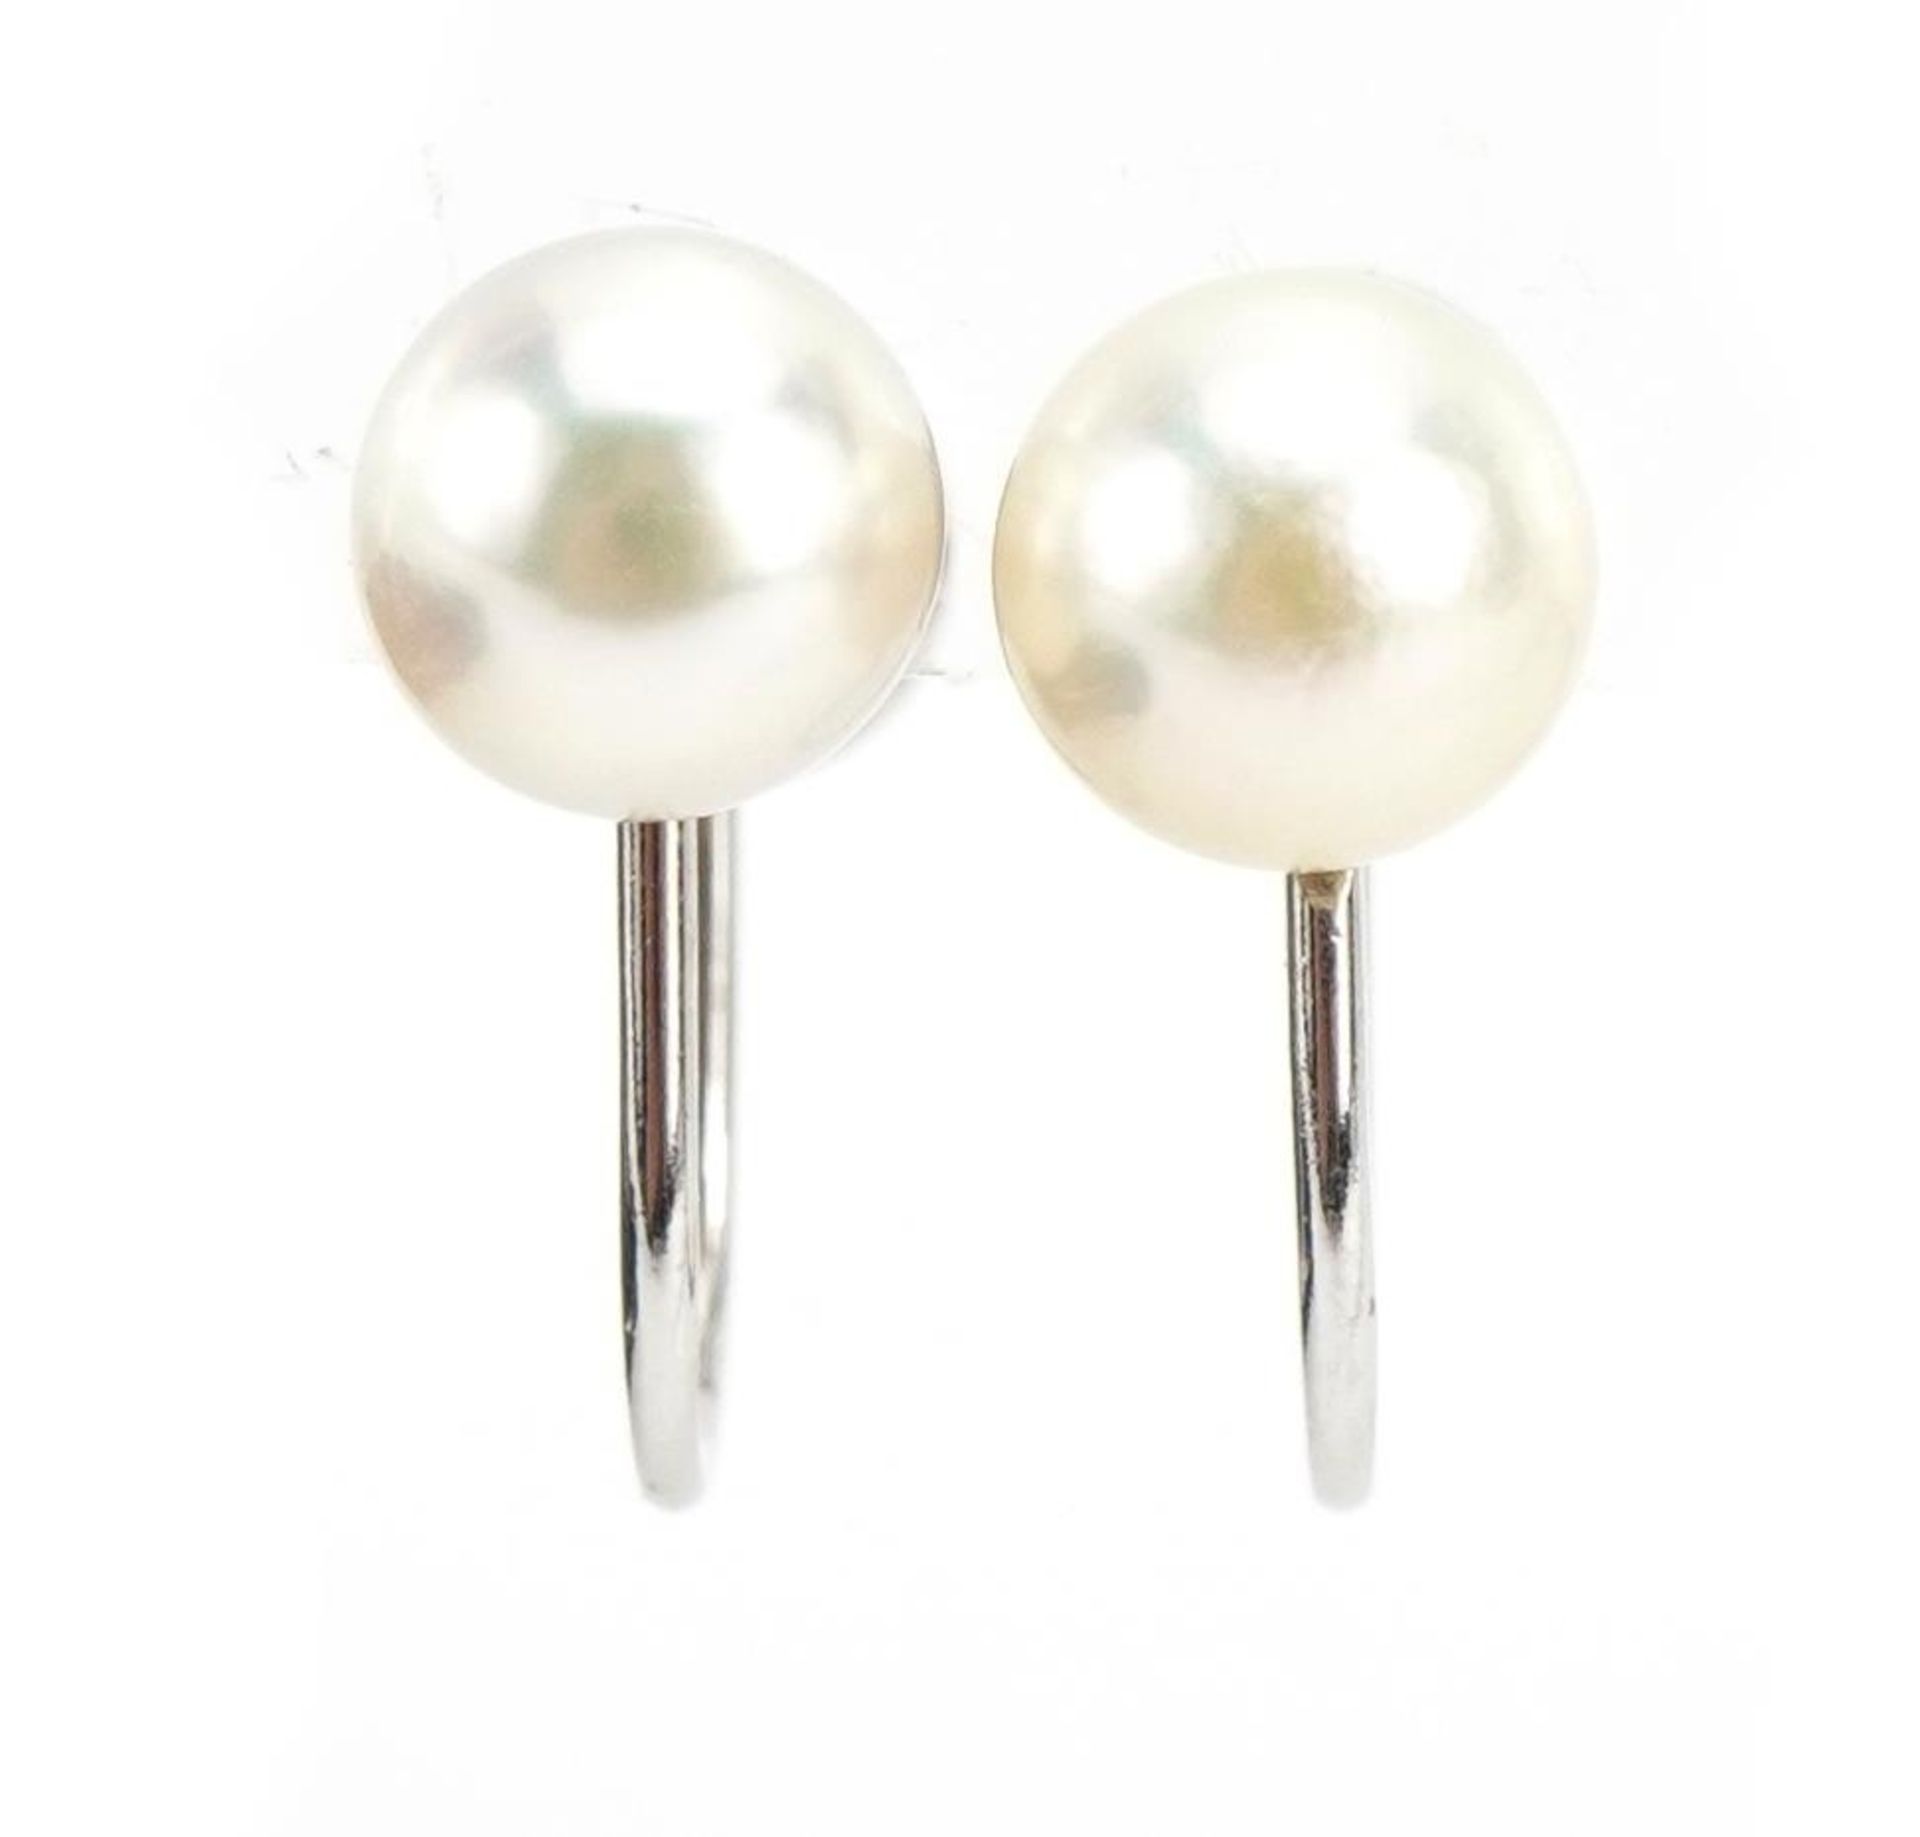 Pair of 14ct white gold cultured pearl earrings with screw backs, 1.2cm high, 1.6g : For further